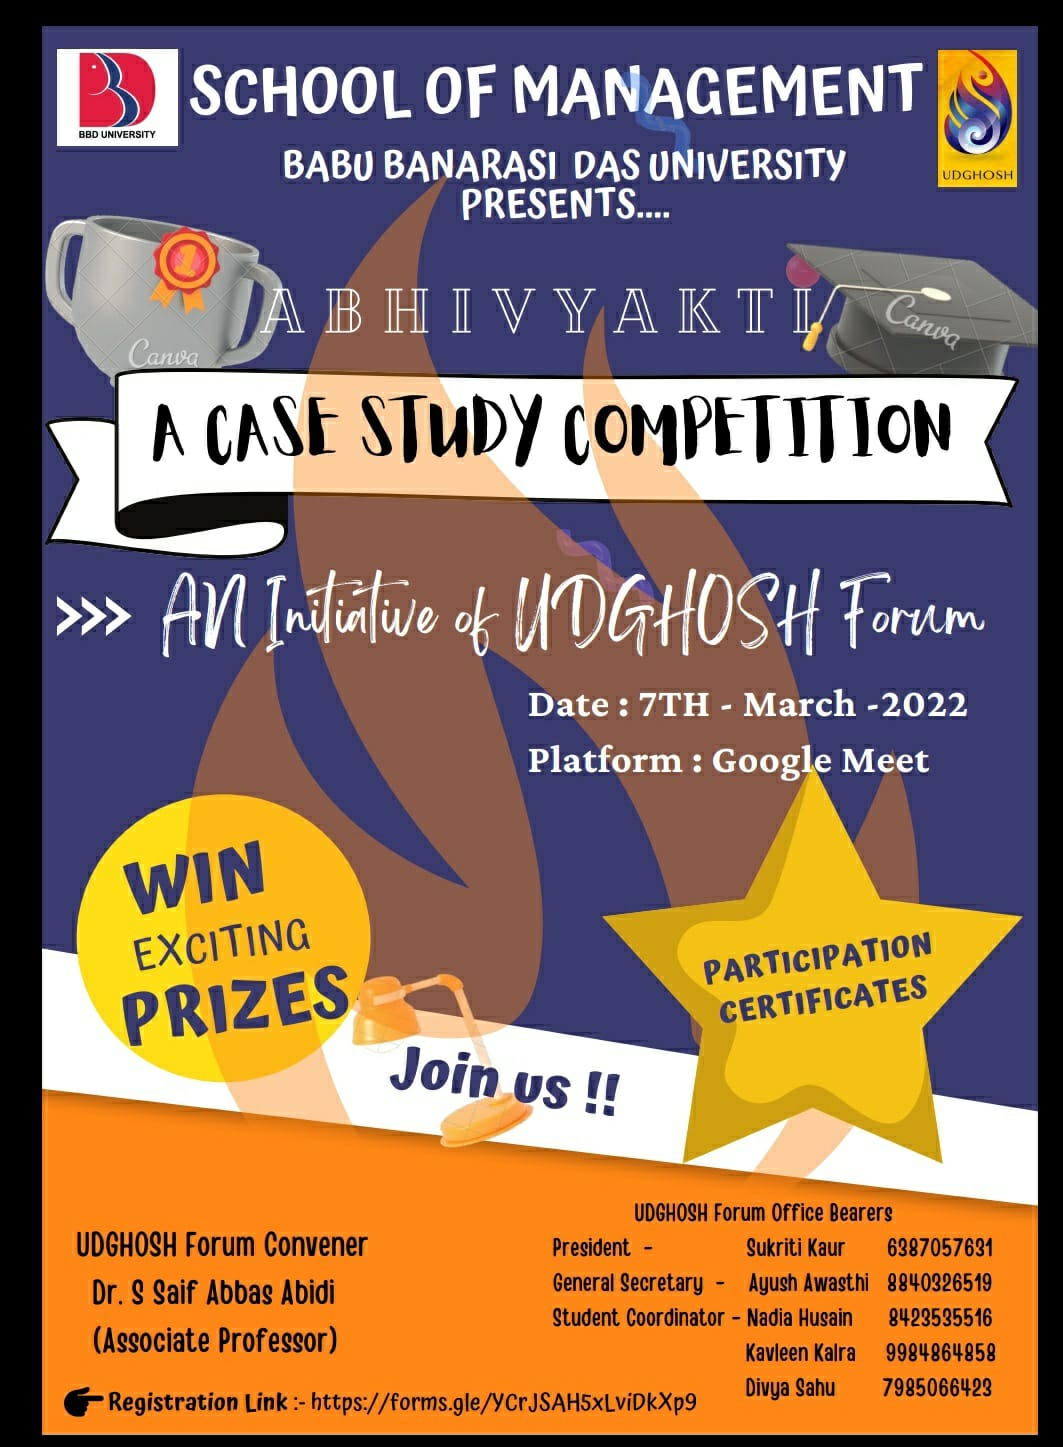 ssc case study competition